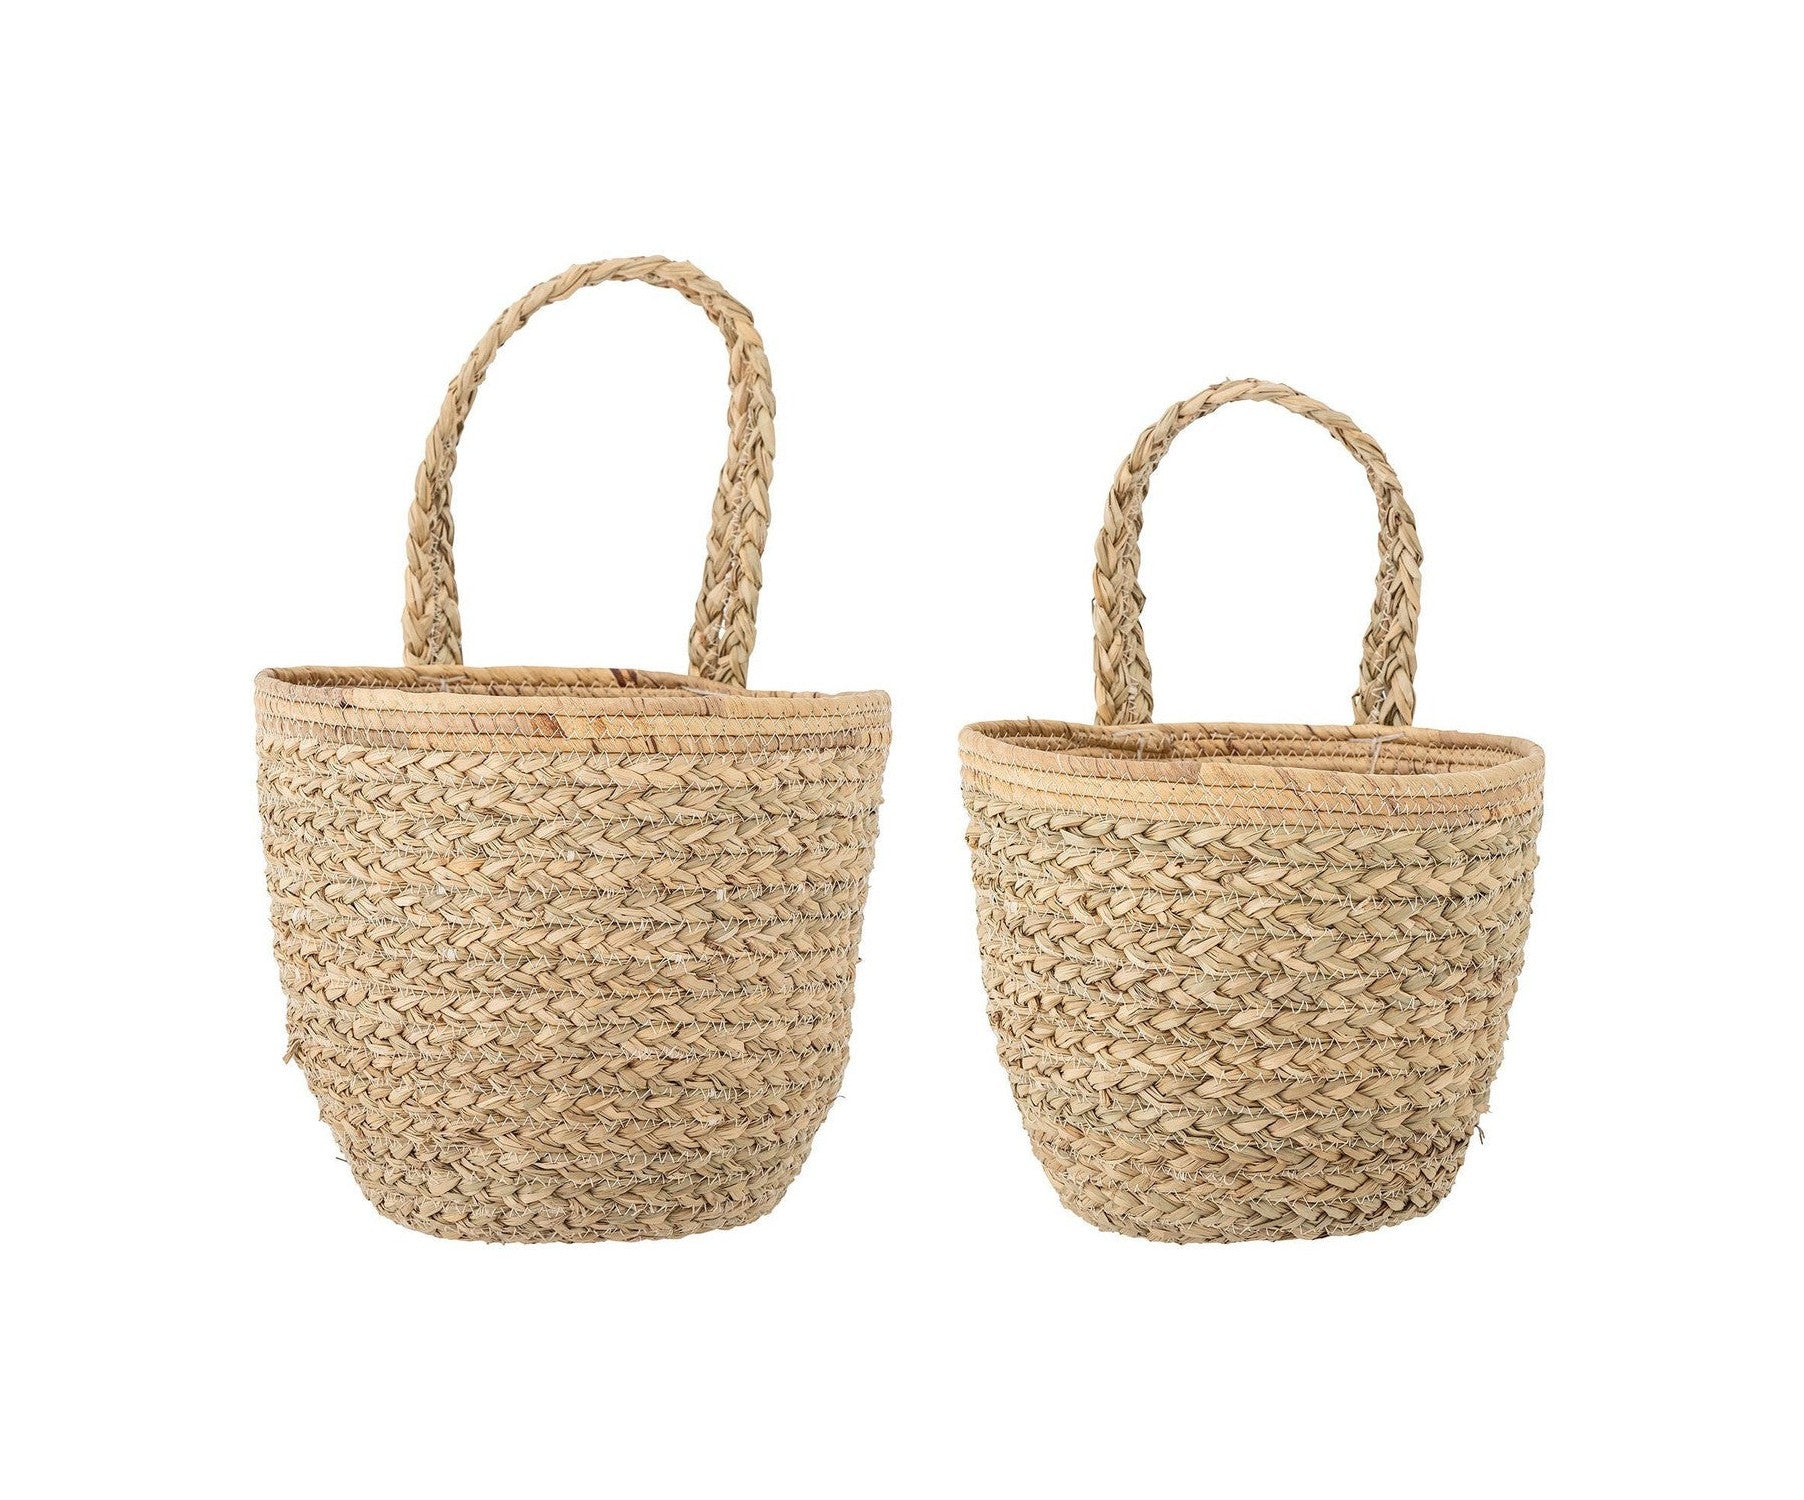 Bloomingville Amia Wall Basket, Natur, Seagrass